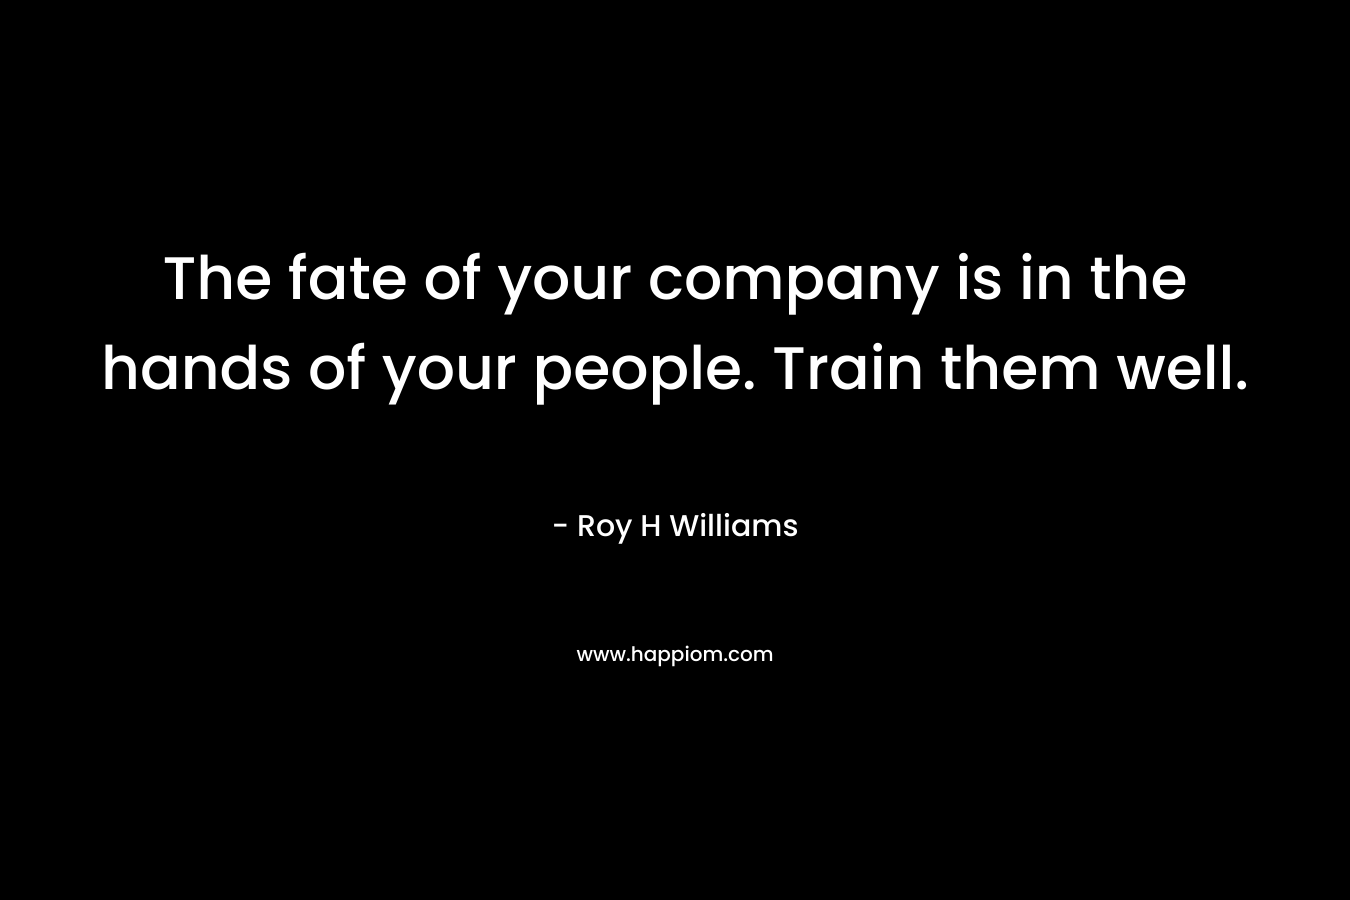 The fate of your company is in the hands of your people. Train them well.